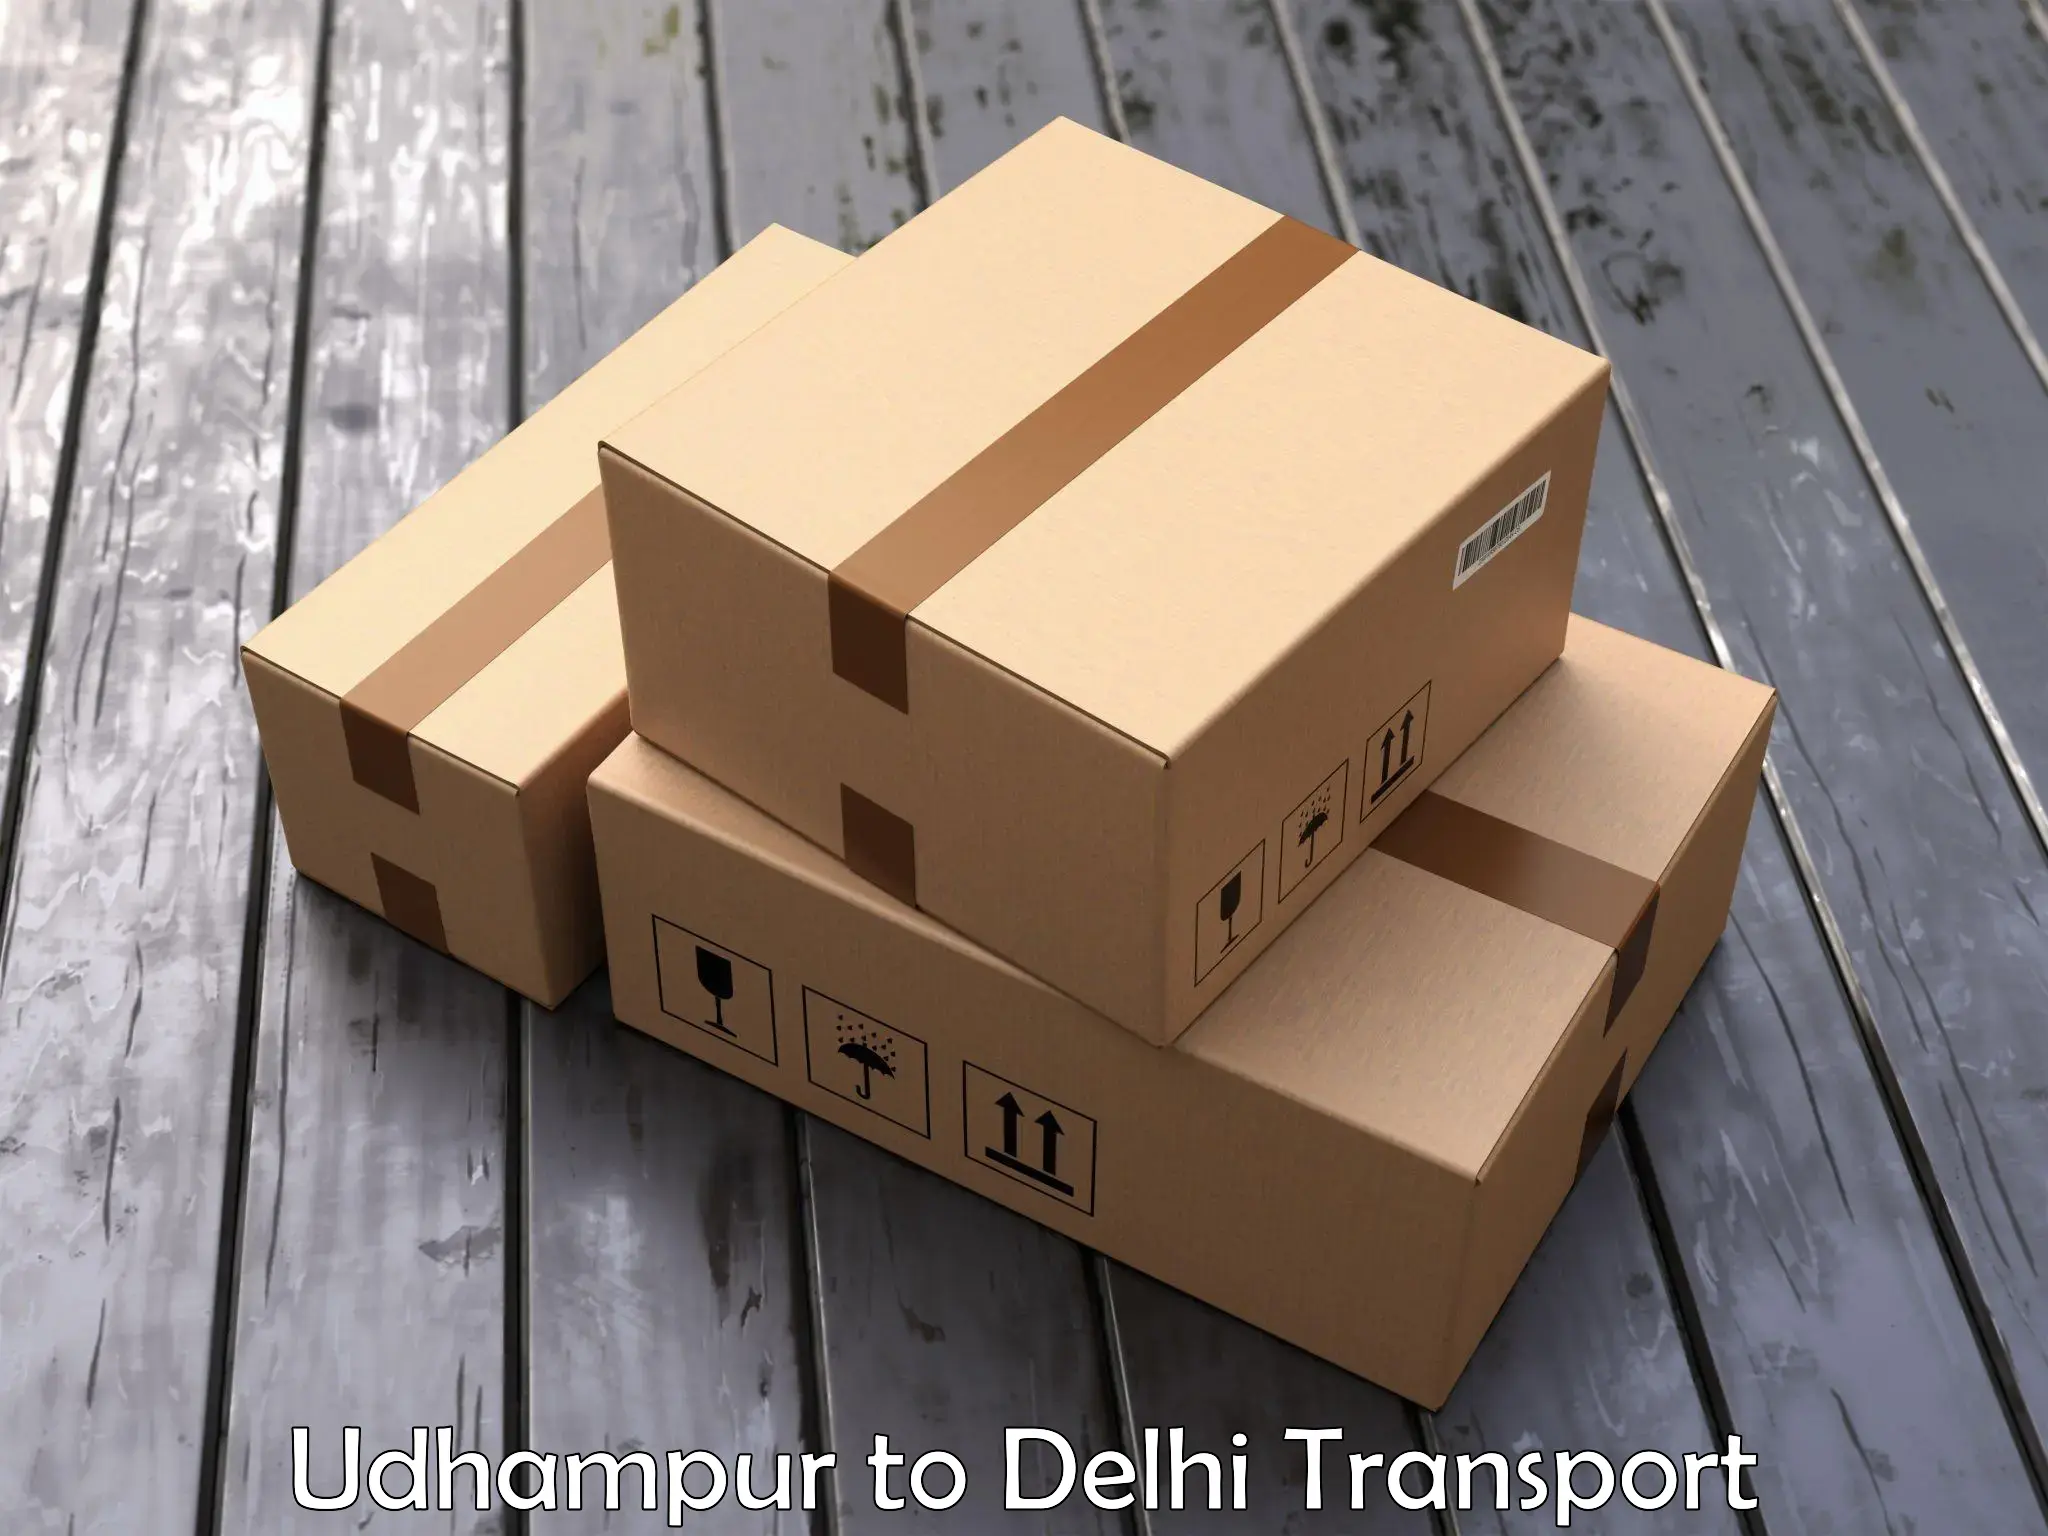 Intercity goods transport Udhampur to NCR